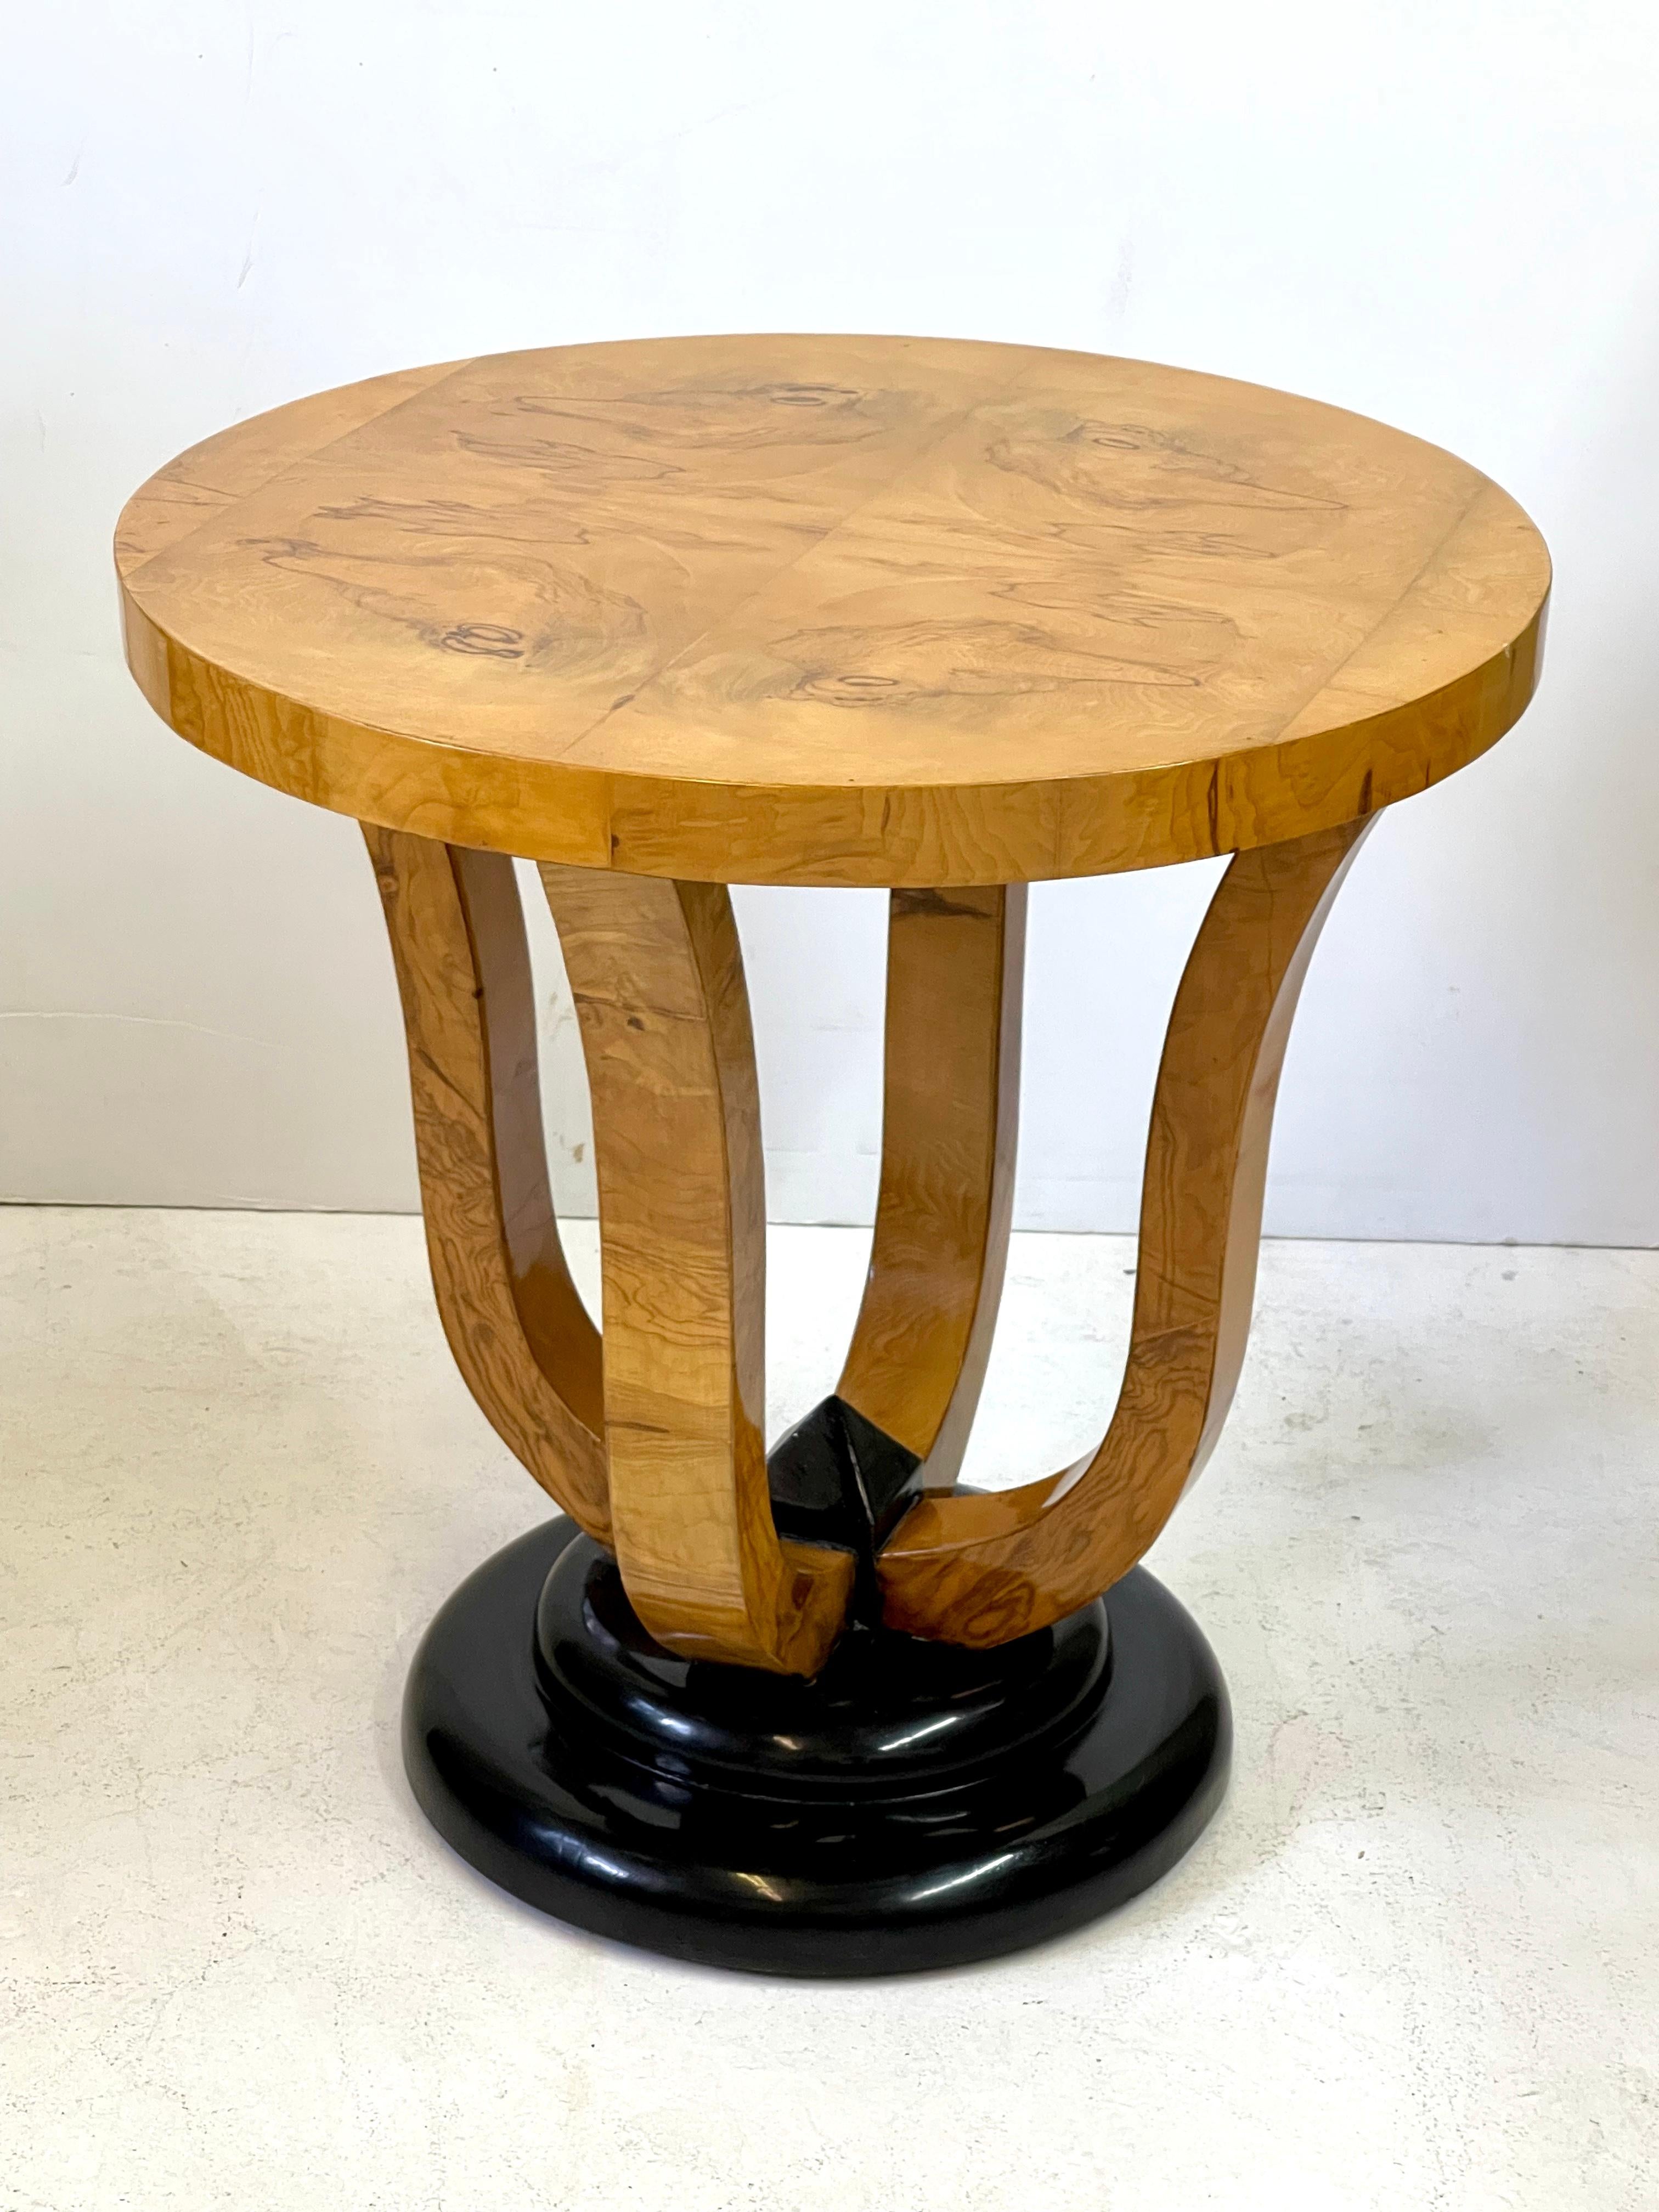 20th Century Italian Art Deco style gueridon table in burled wood veneer having a beautifully designed, book-matched top over a tulip form base. The four legs taper down to a stepped platform and a decorative center accent that have been